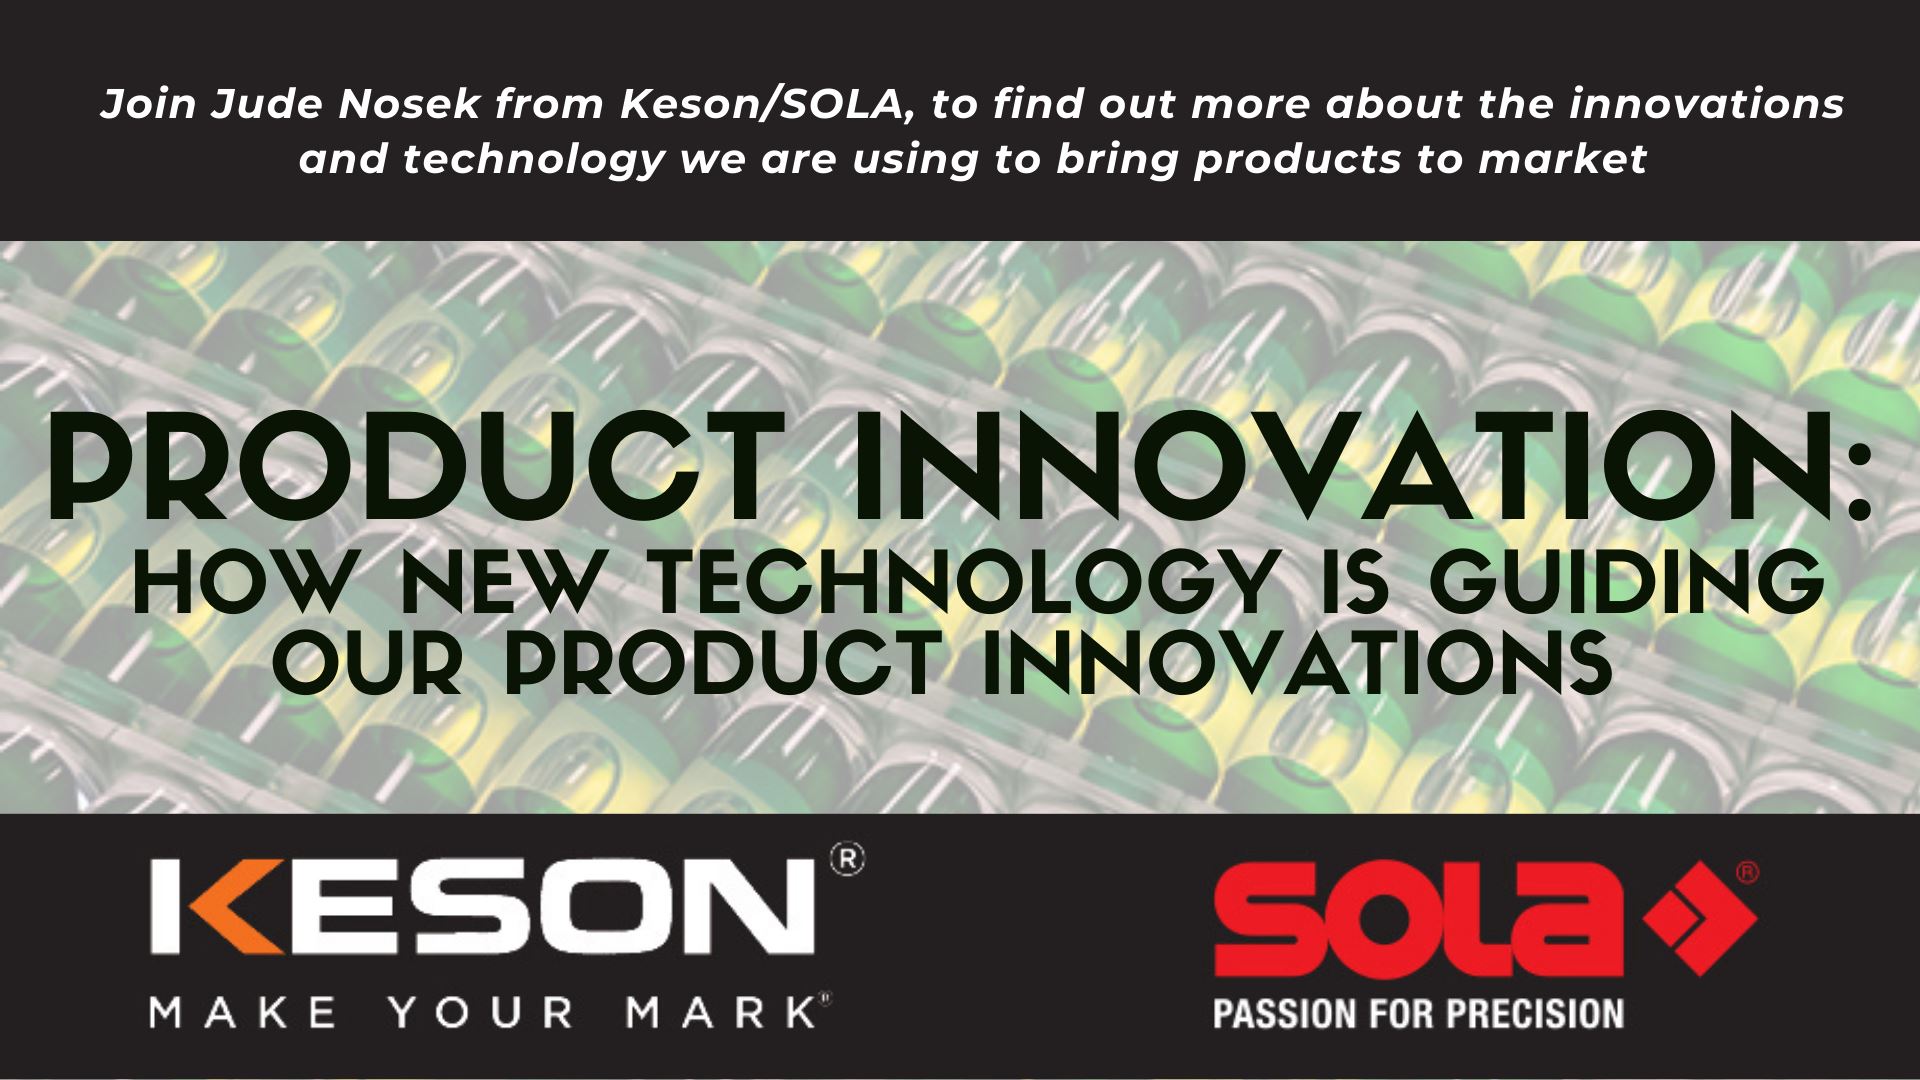 Product Innovations